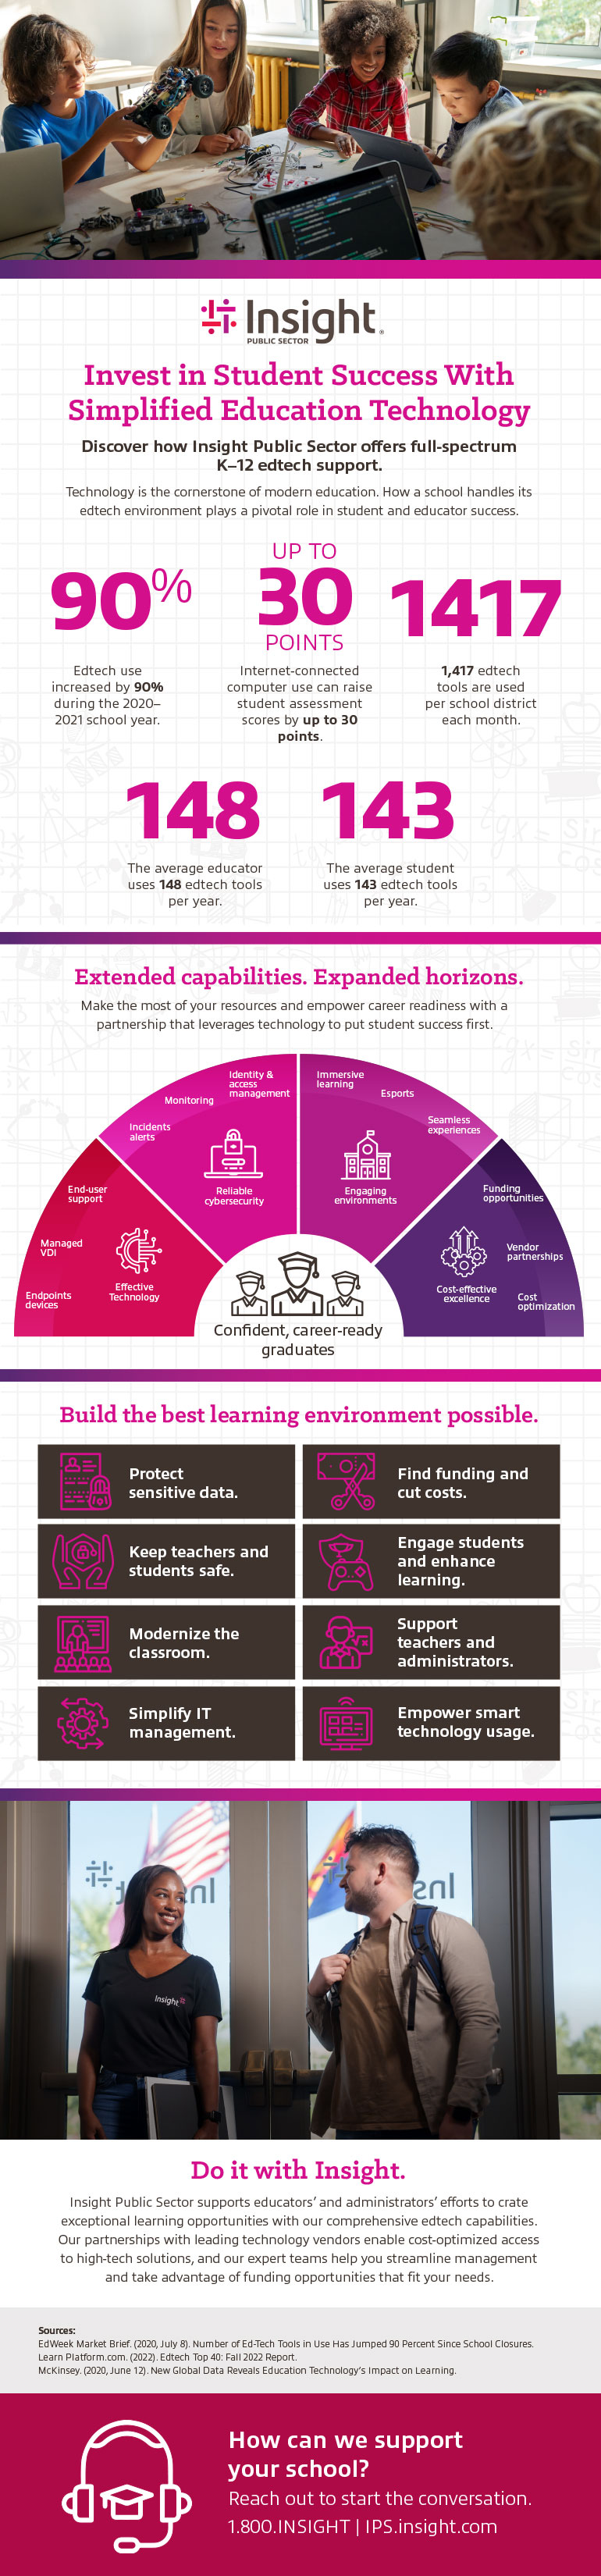 Student success infographic as transcribed below